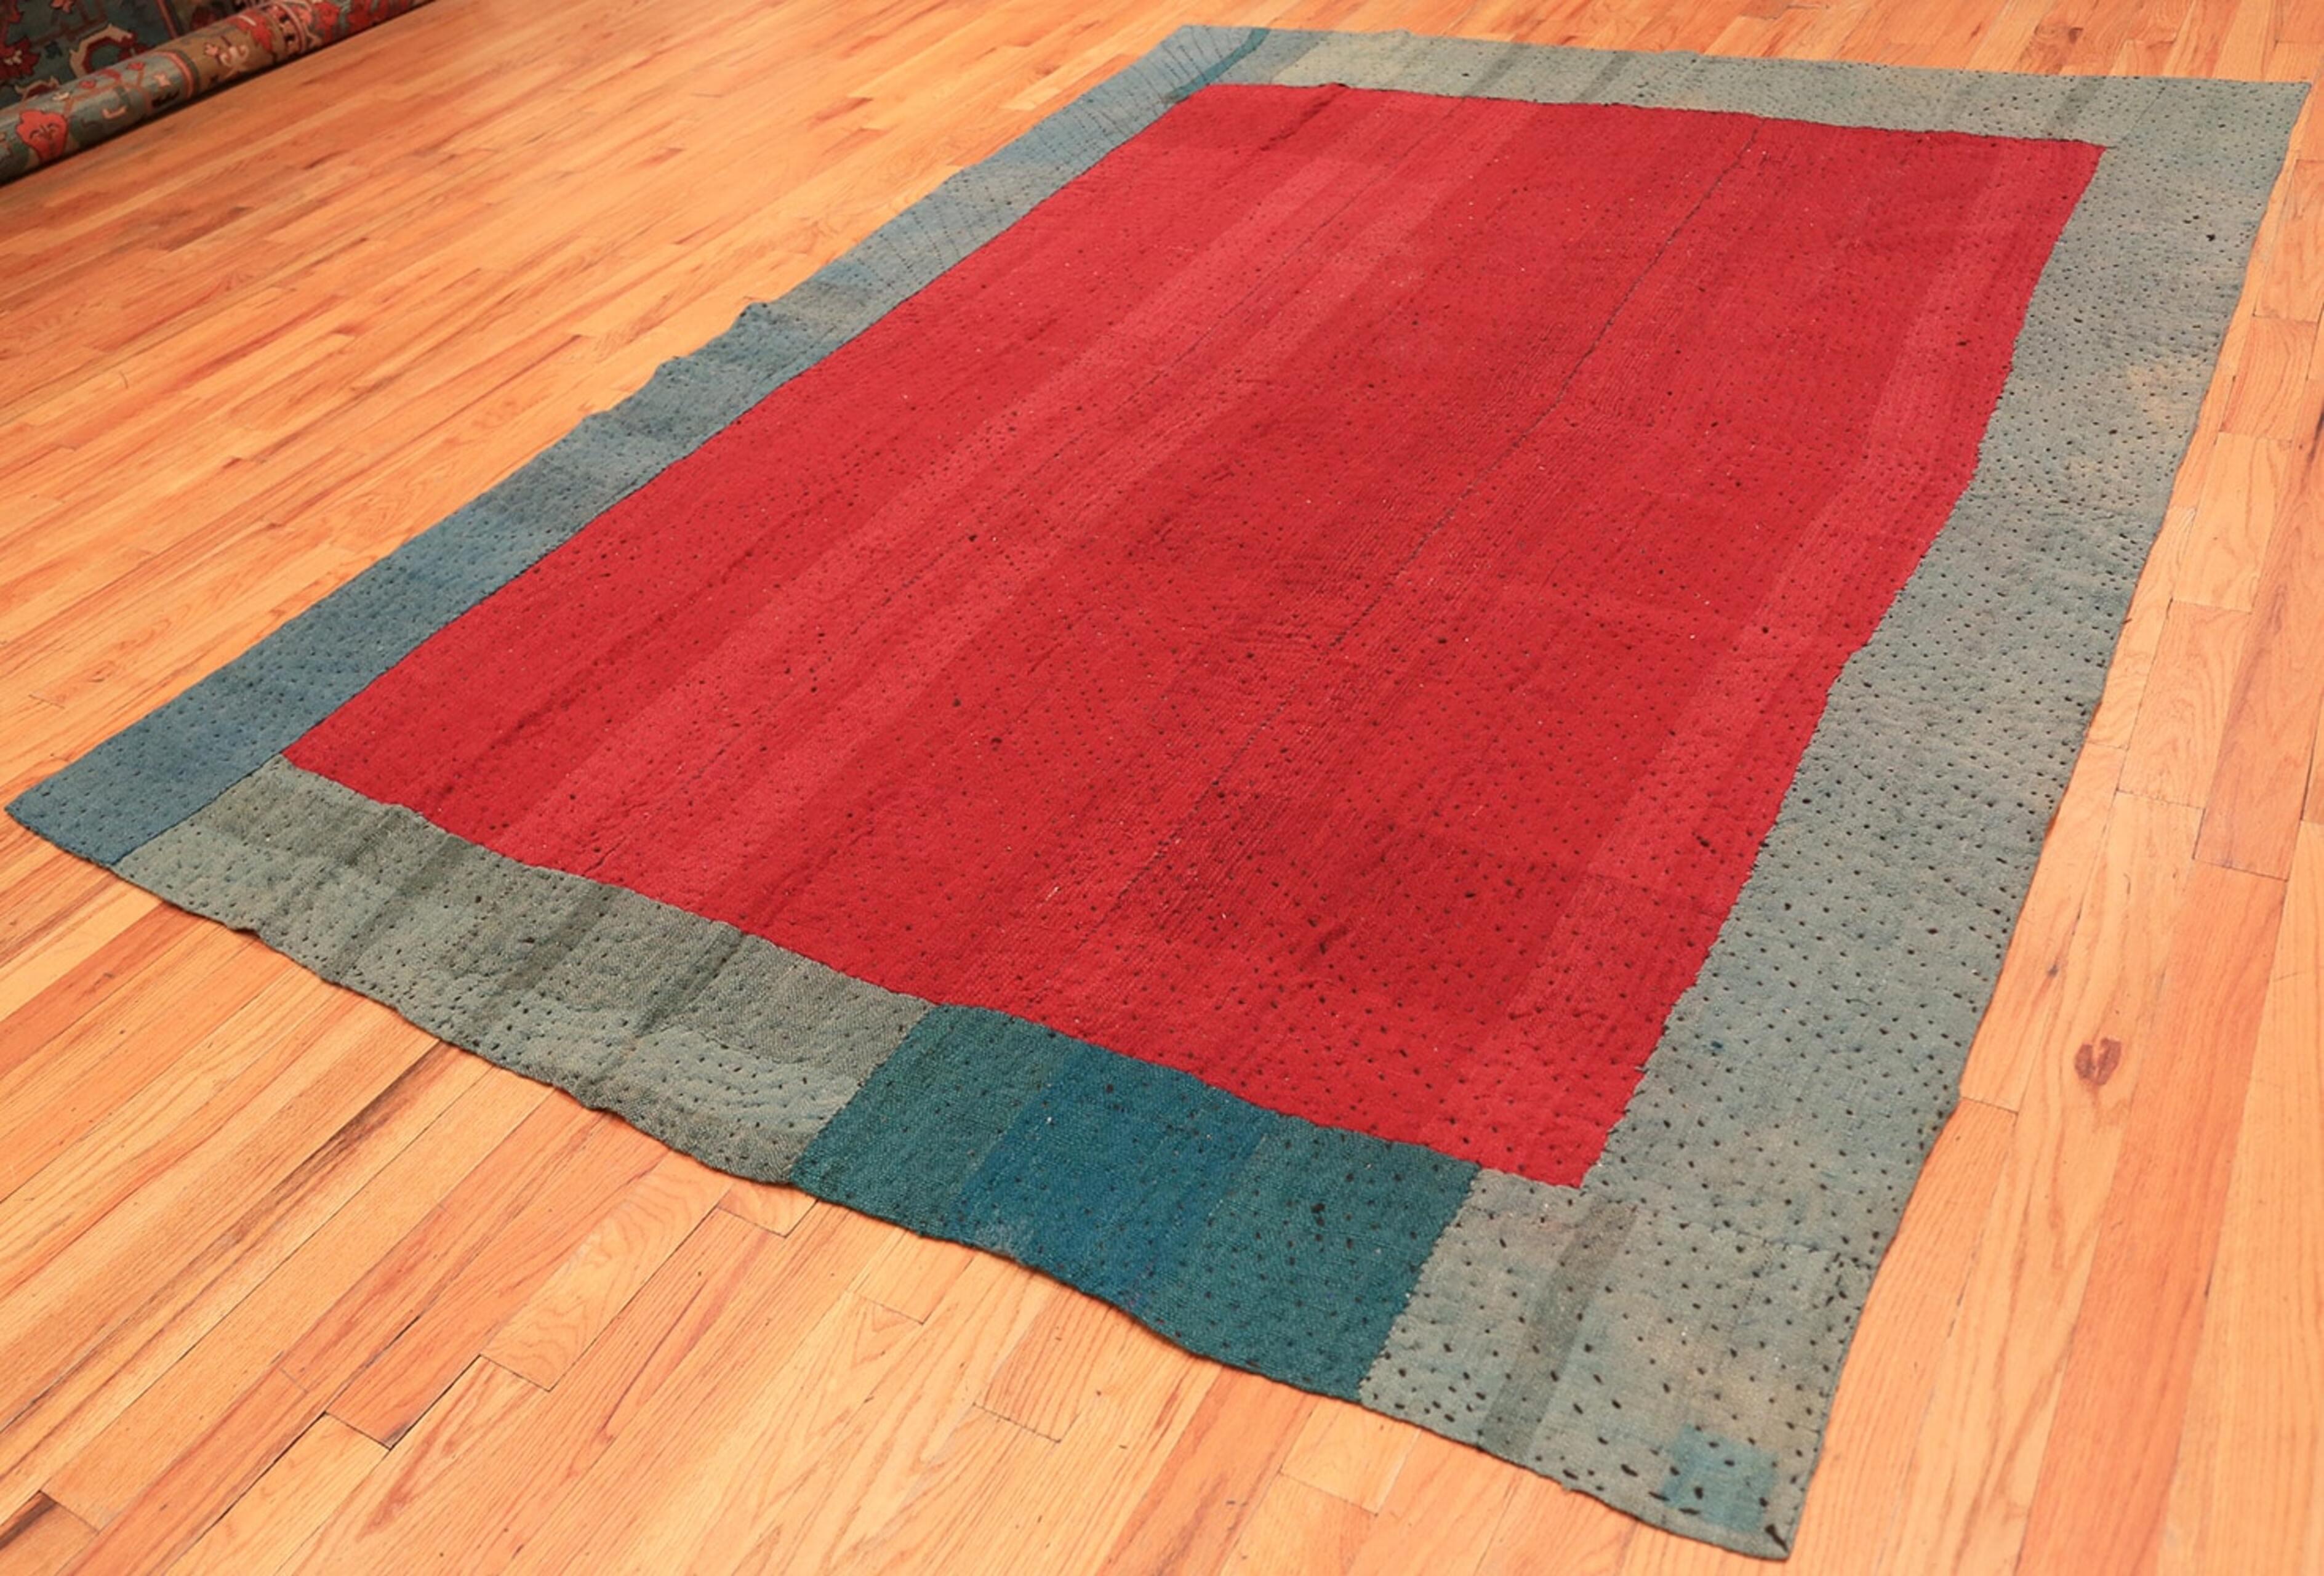 Antique Persian Mazandaran Kilim, Persia, Early 20th Century – This reversible antique Persian sofreh blanket features a marvelous collection of flowing stripes, modern color blocks and organic patterns rendered in a tonal selection of turquoise,